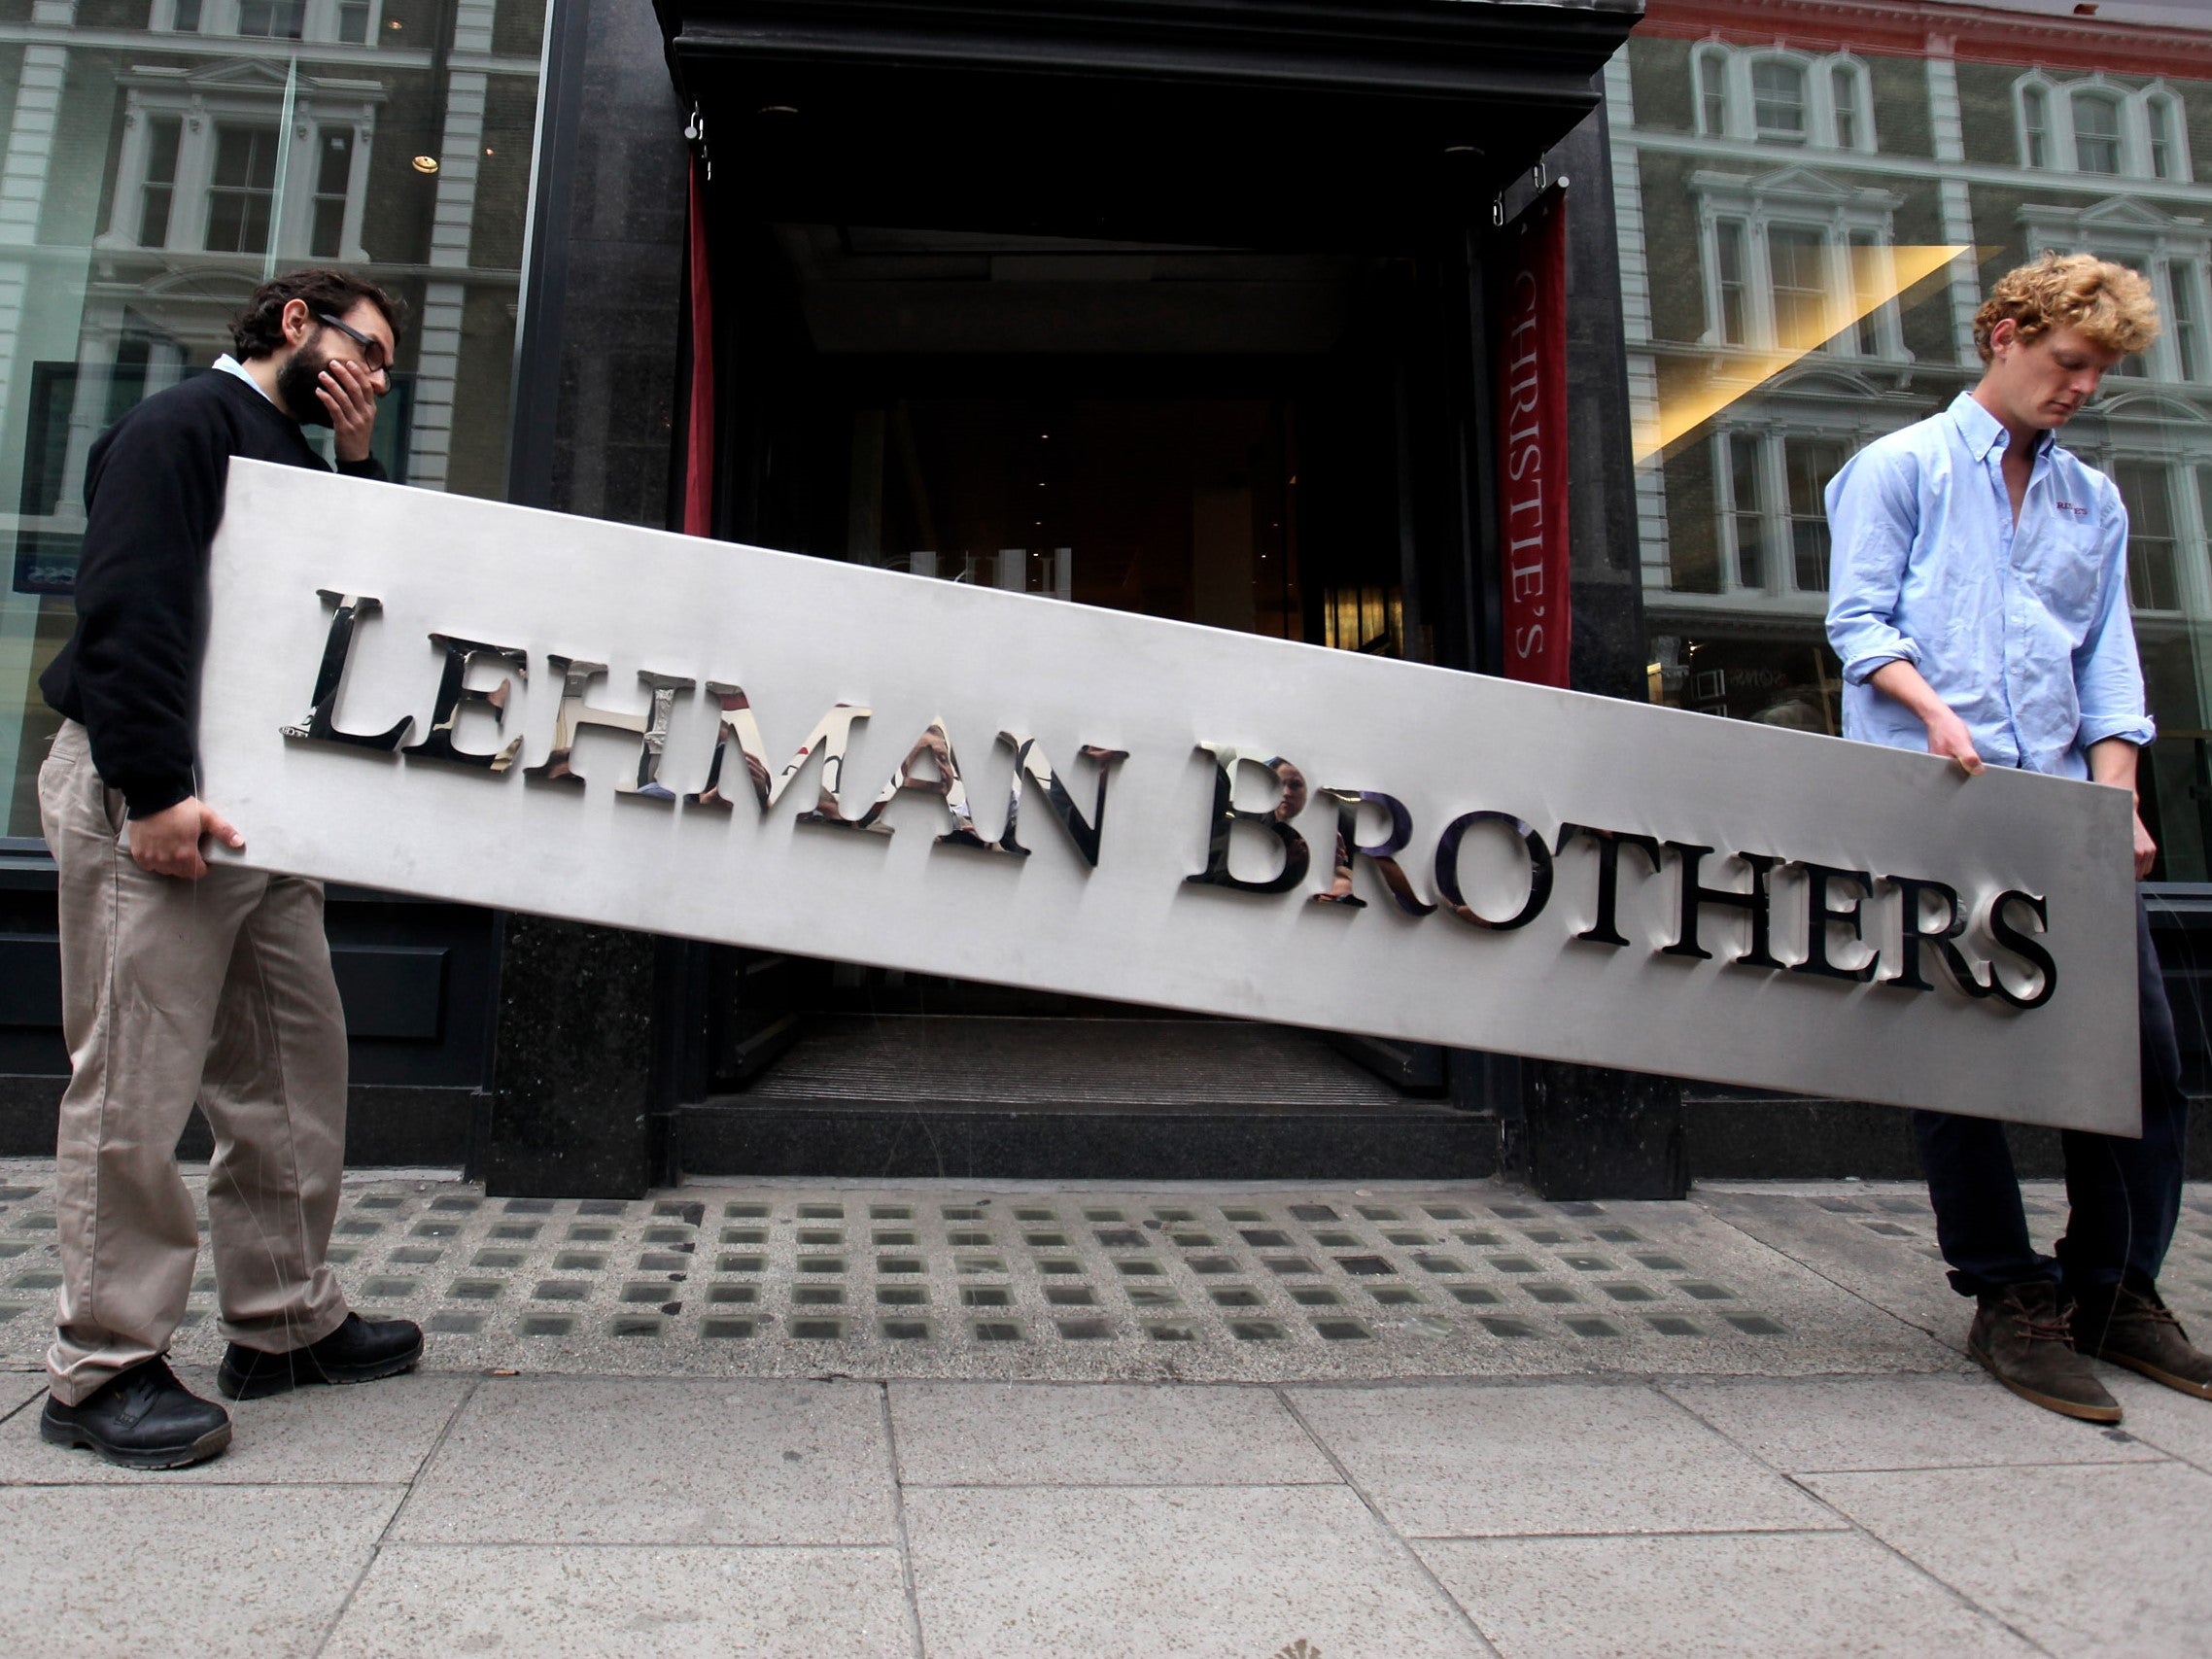 Some observers are drawing comparisons to the 2007-08 financial crisis that resulted in the bankruptcy of banking giants Lehman Brothers